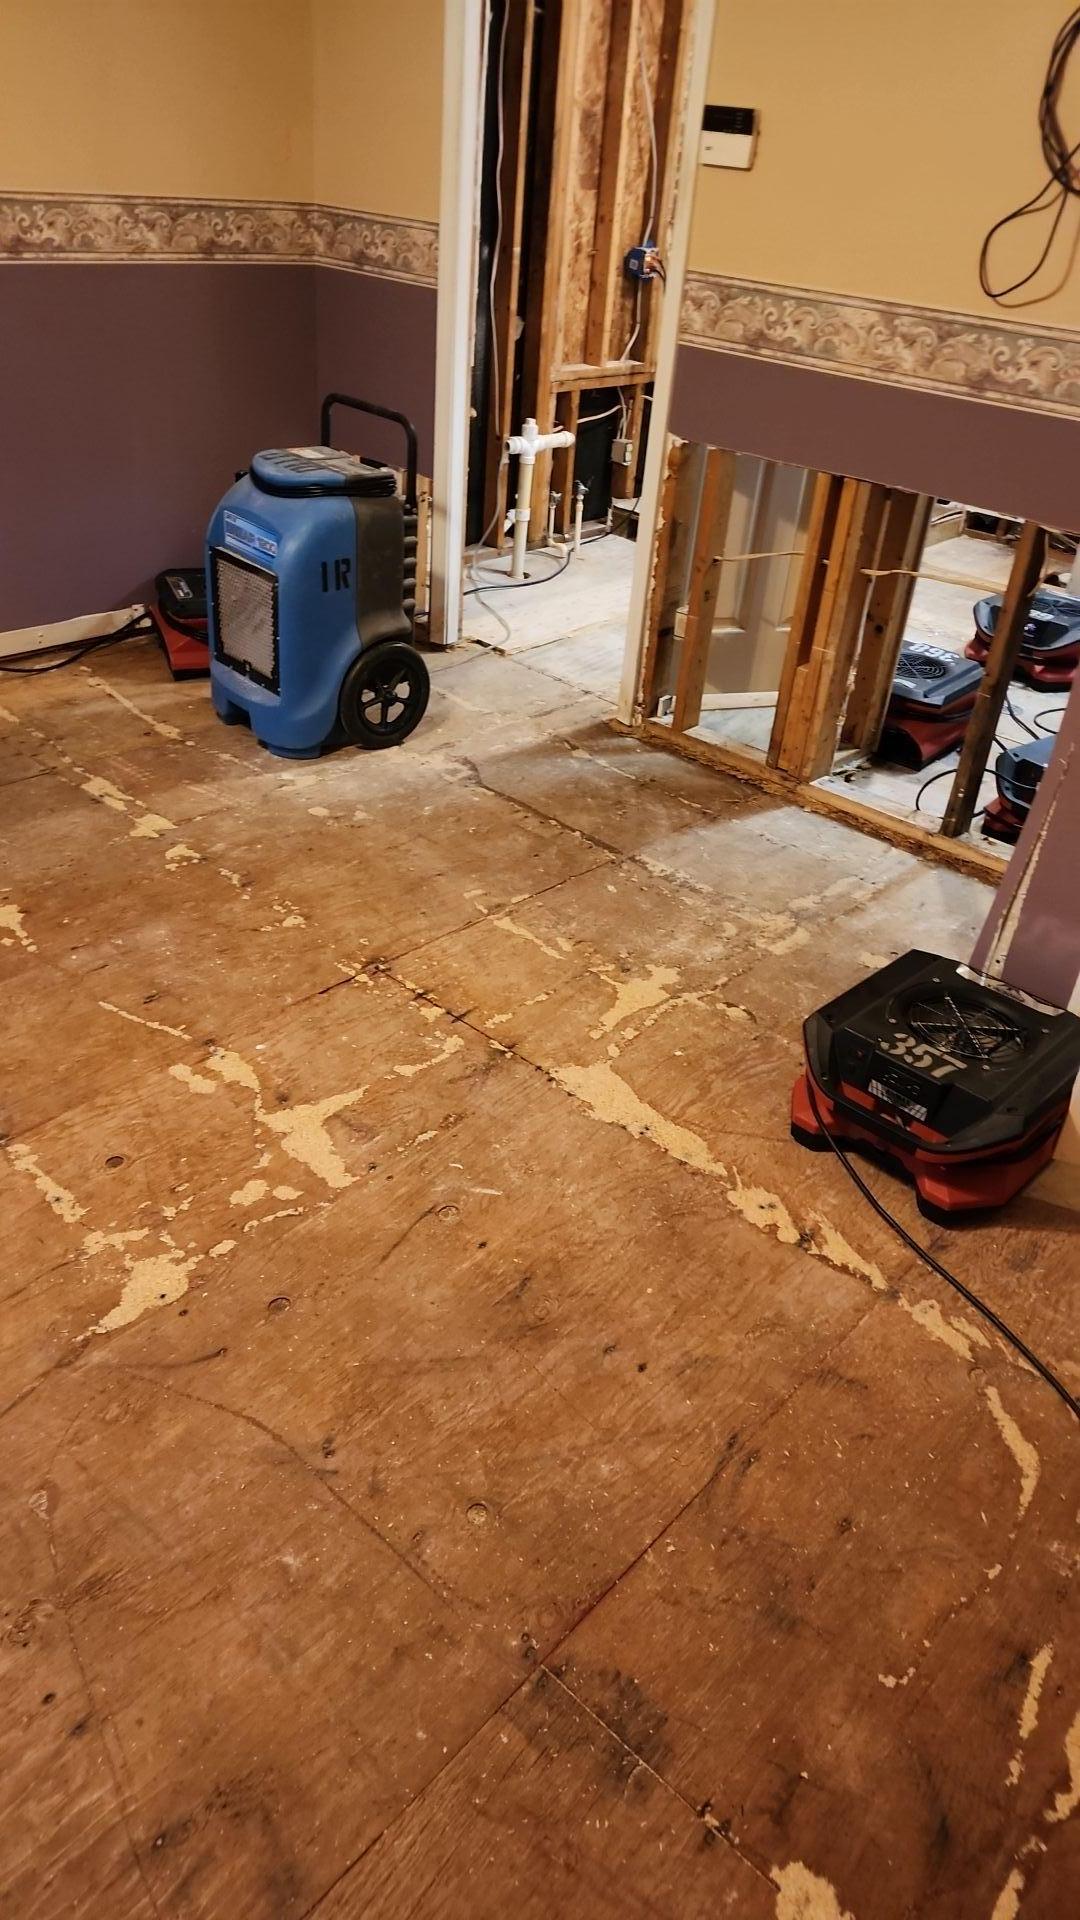 Drying out the floors and walls with dehumidifiers